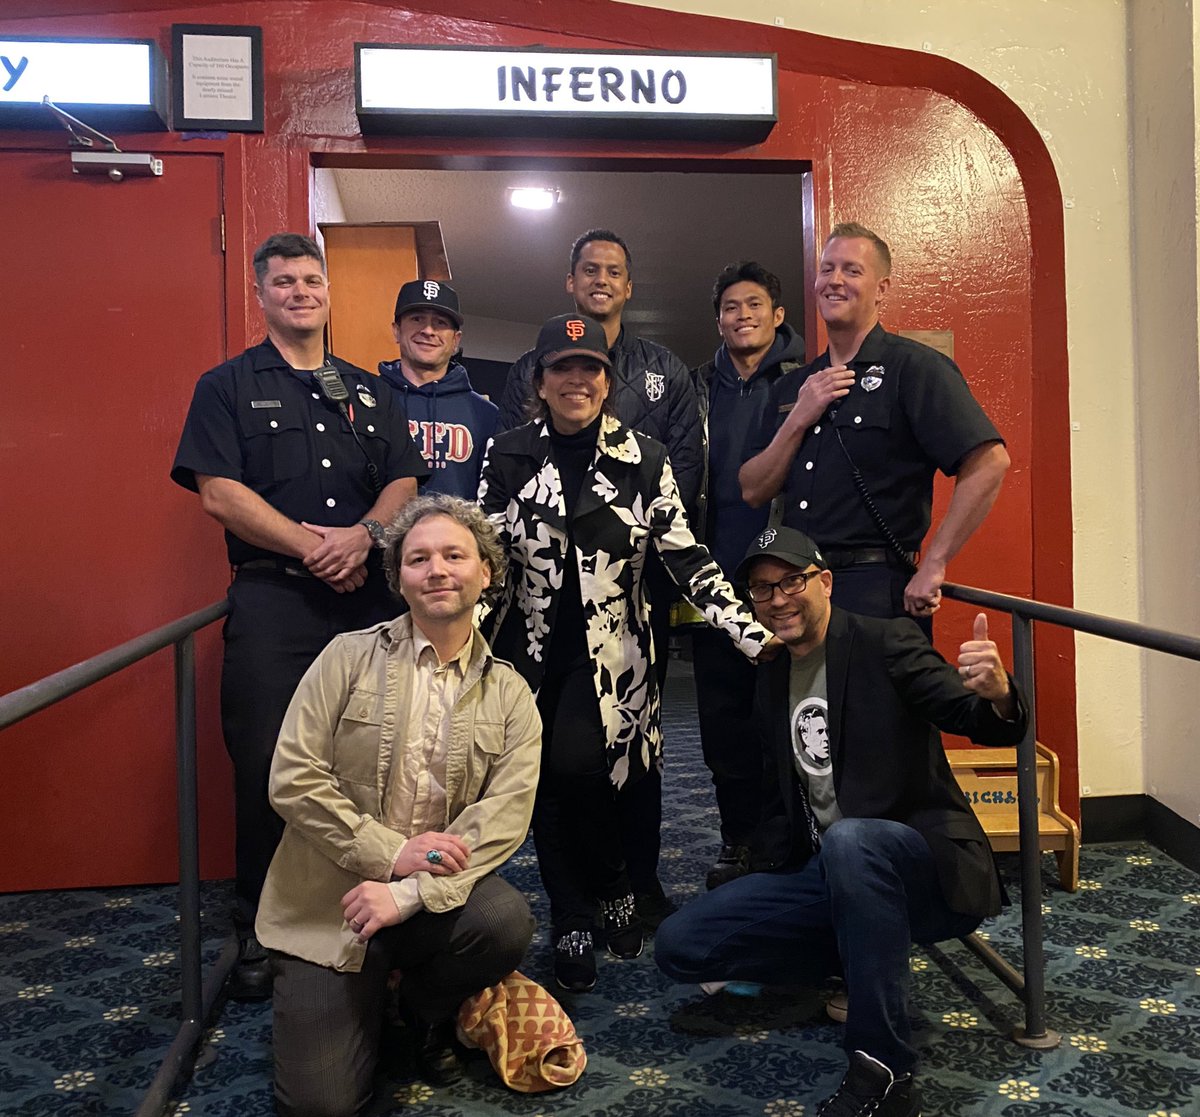 Omg the San Francisco Fire Department and “The Towering Inferno” co-star Carlena Gower are here for our SOLD OUT #TotalSF screening. Love this city tonight. 🔥🌁🔥 @SFFDPIO @TonyBravoSF @balboatheatresf